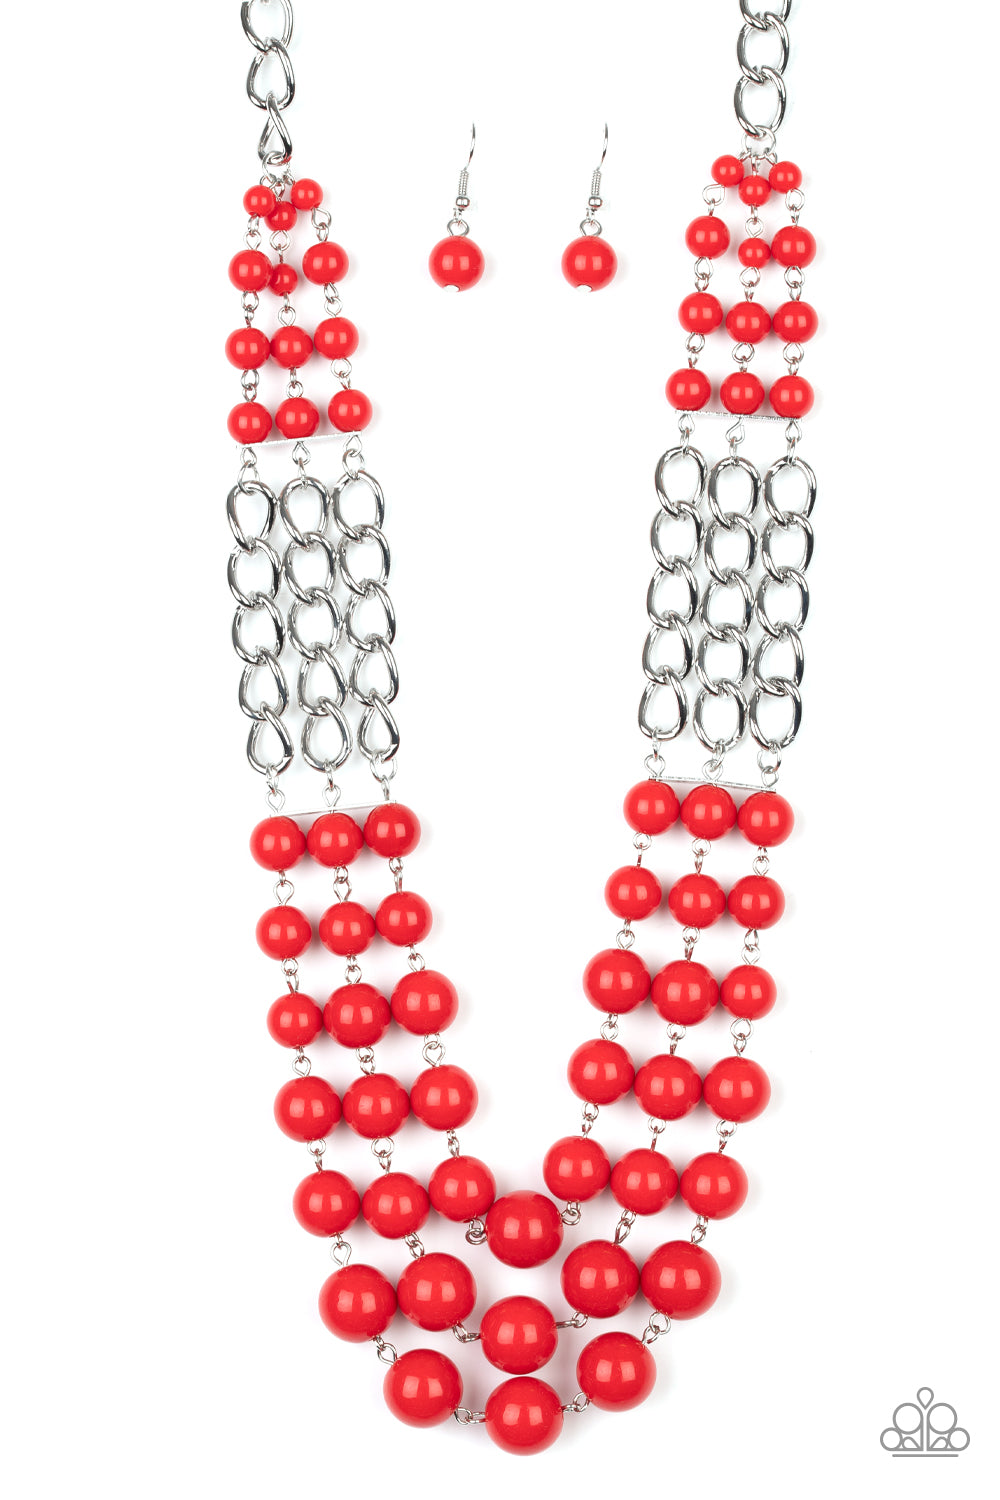 &lt;P&gt;Sections of thick silver chains and bubbly red beaded rows layer below the collar, creating statement-making layers. Features an adjustable clasp closure.
&lt;/p&gt;

&lt;P&gt;&lt;i&gt; Sold as one individual necklace.  Includes one pair of matching earrings.
&lt;/i&gt;&lt;/p&gt;

&lt;img src=\&quot;https://d9b54x484lq62.cloudfront.net/paparazzi/shopping/images/517_tag150x115_1.png\&quot; alt=\&quot;New Kit\&quot; align=\&quot;middle\&quot; height=\&quot;50\&quot; width=\&quot;50\&quot;/&gt;